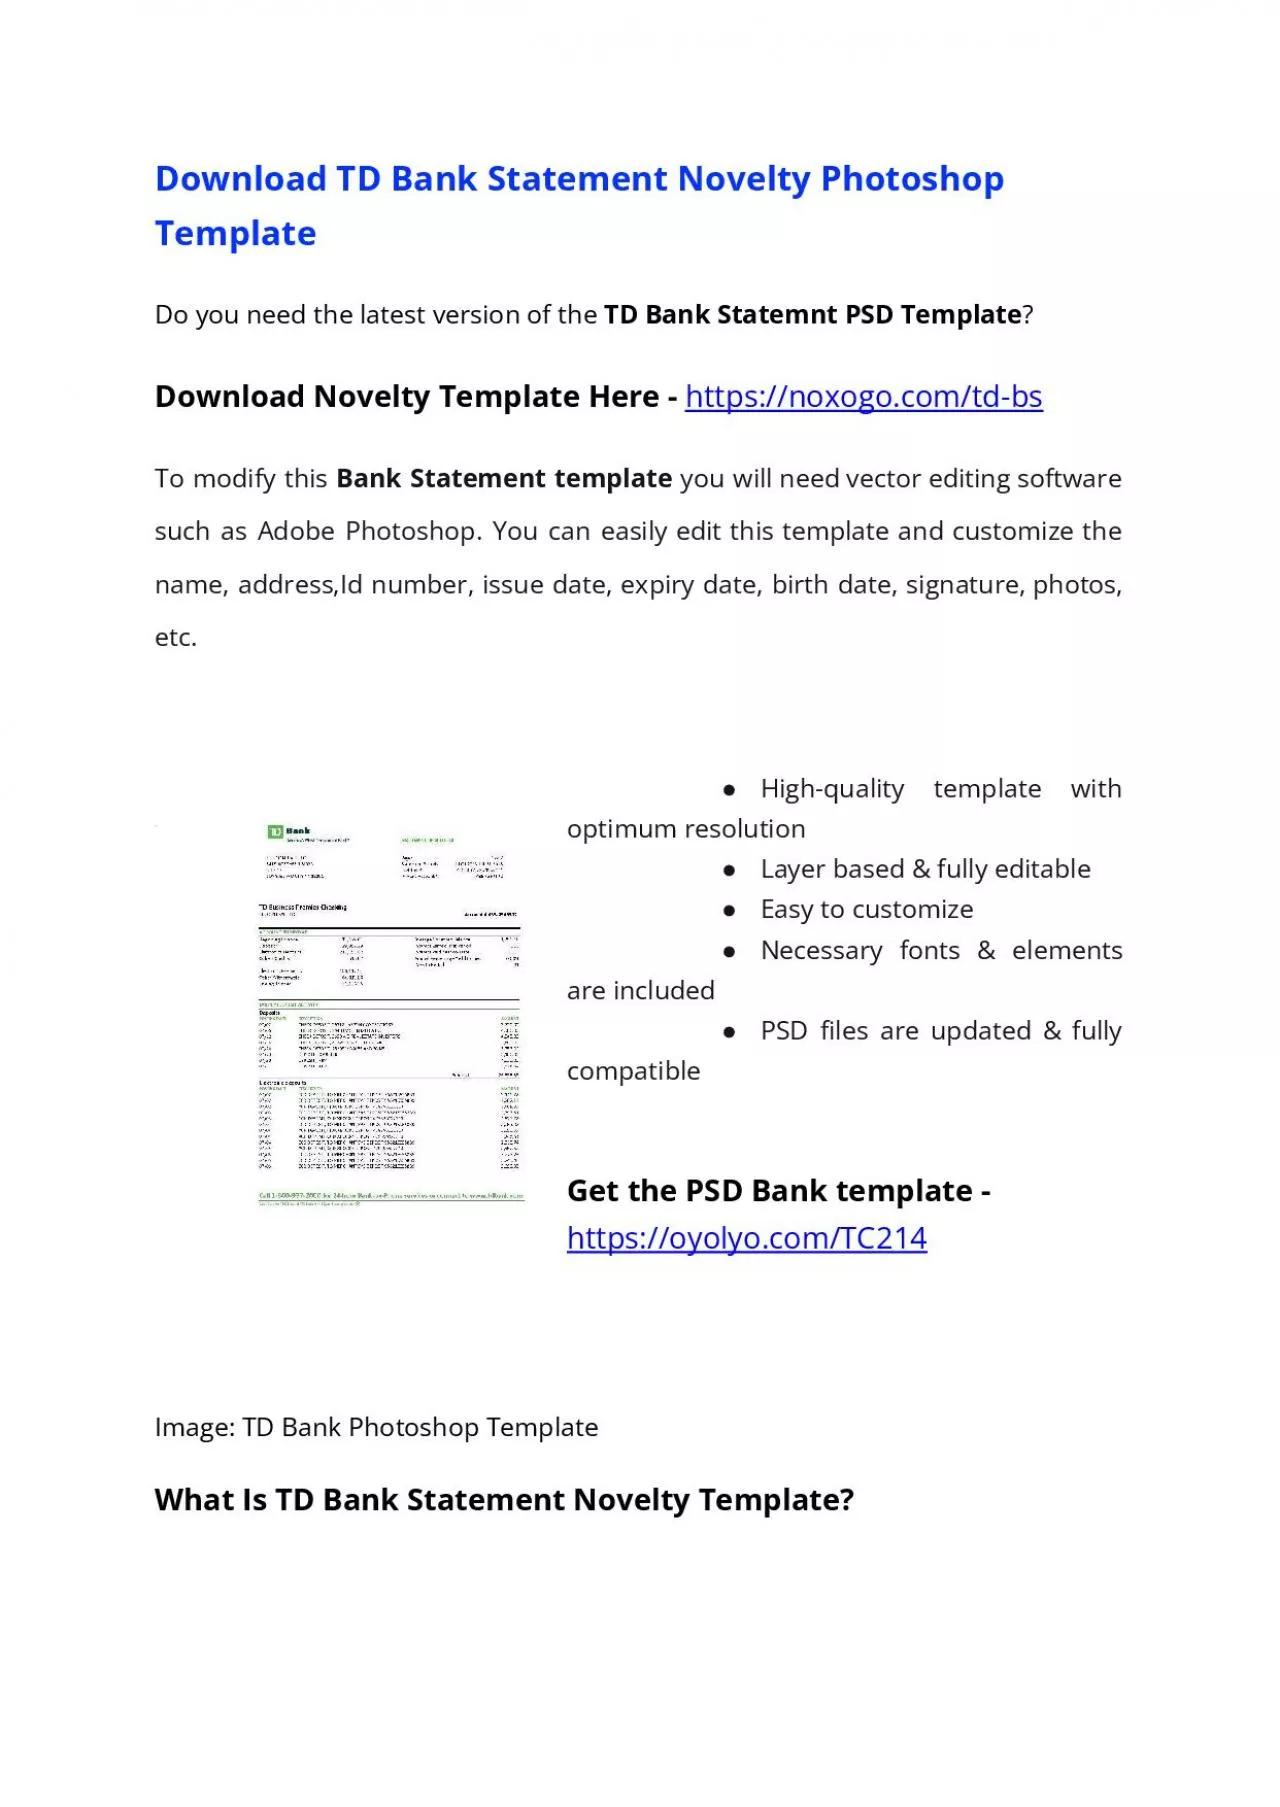 TD Bank Statement Template – Download MS Word File